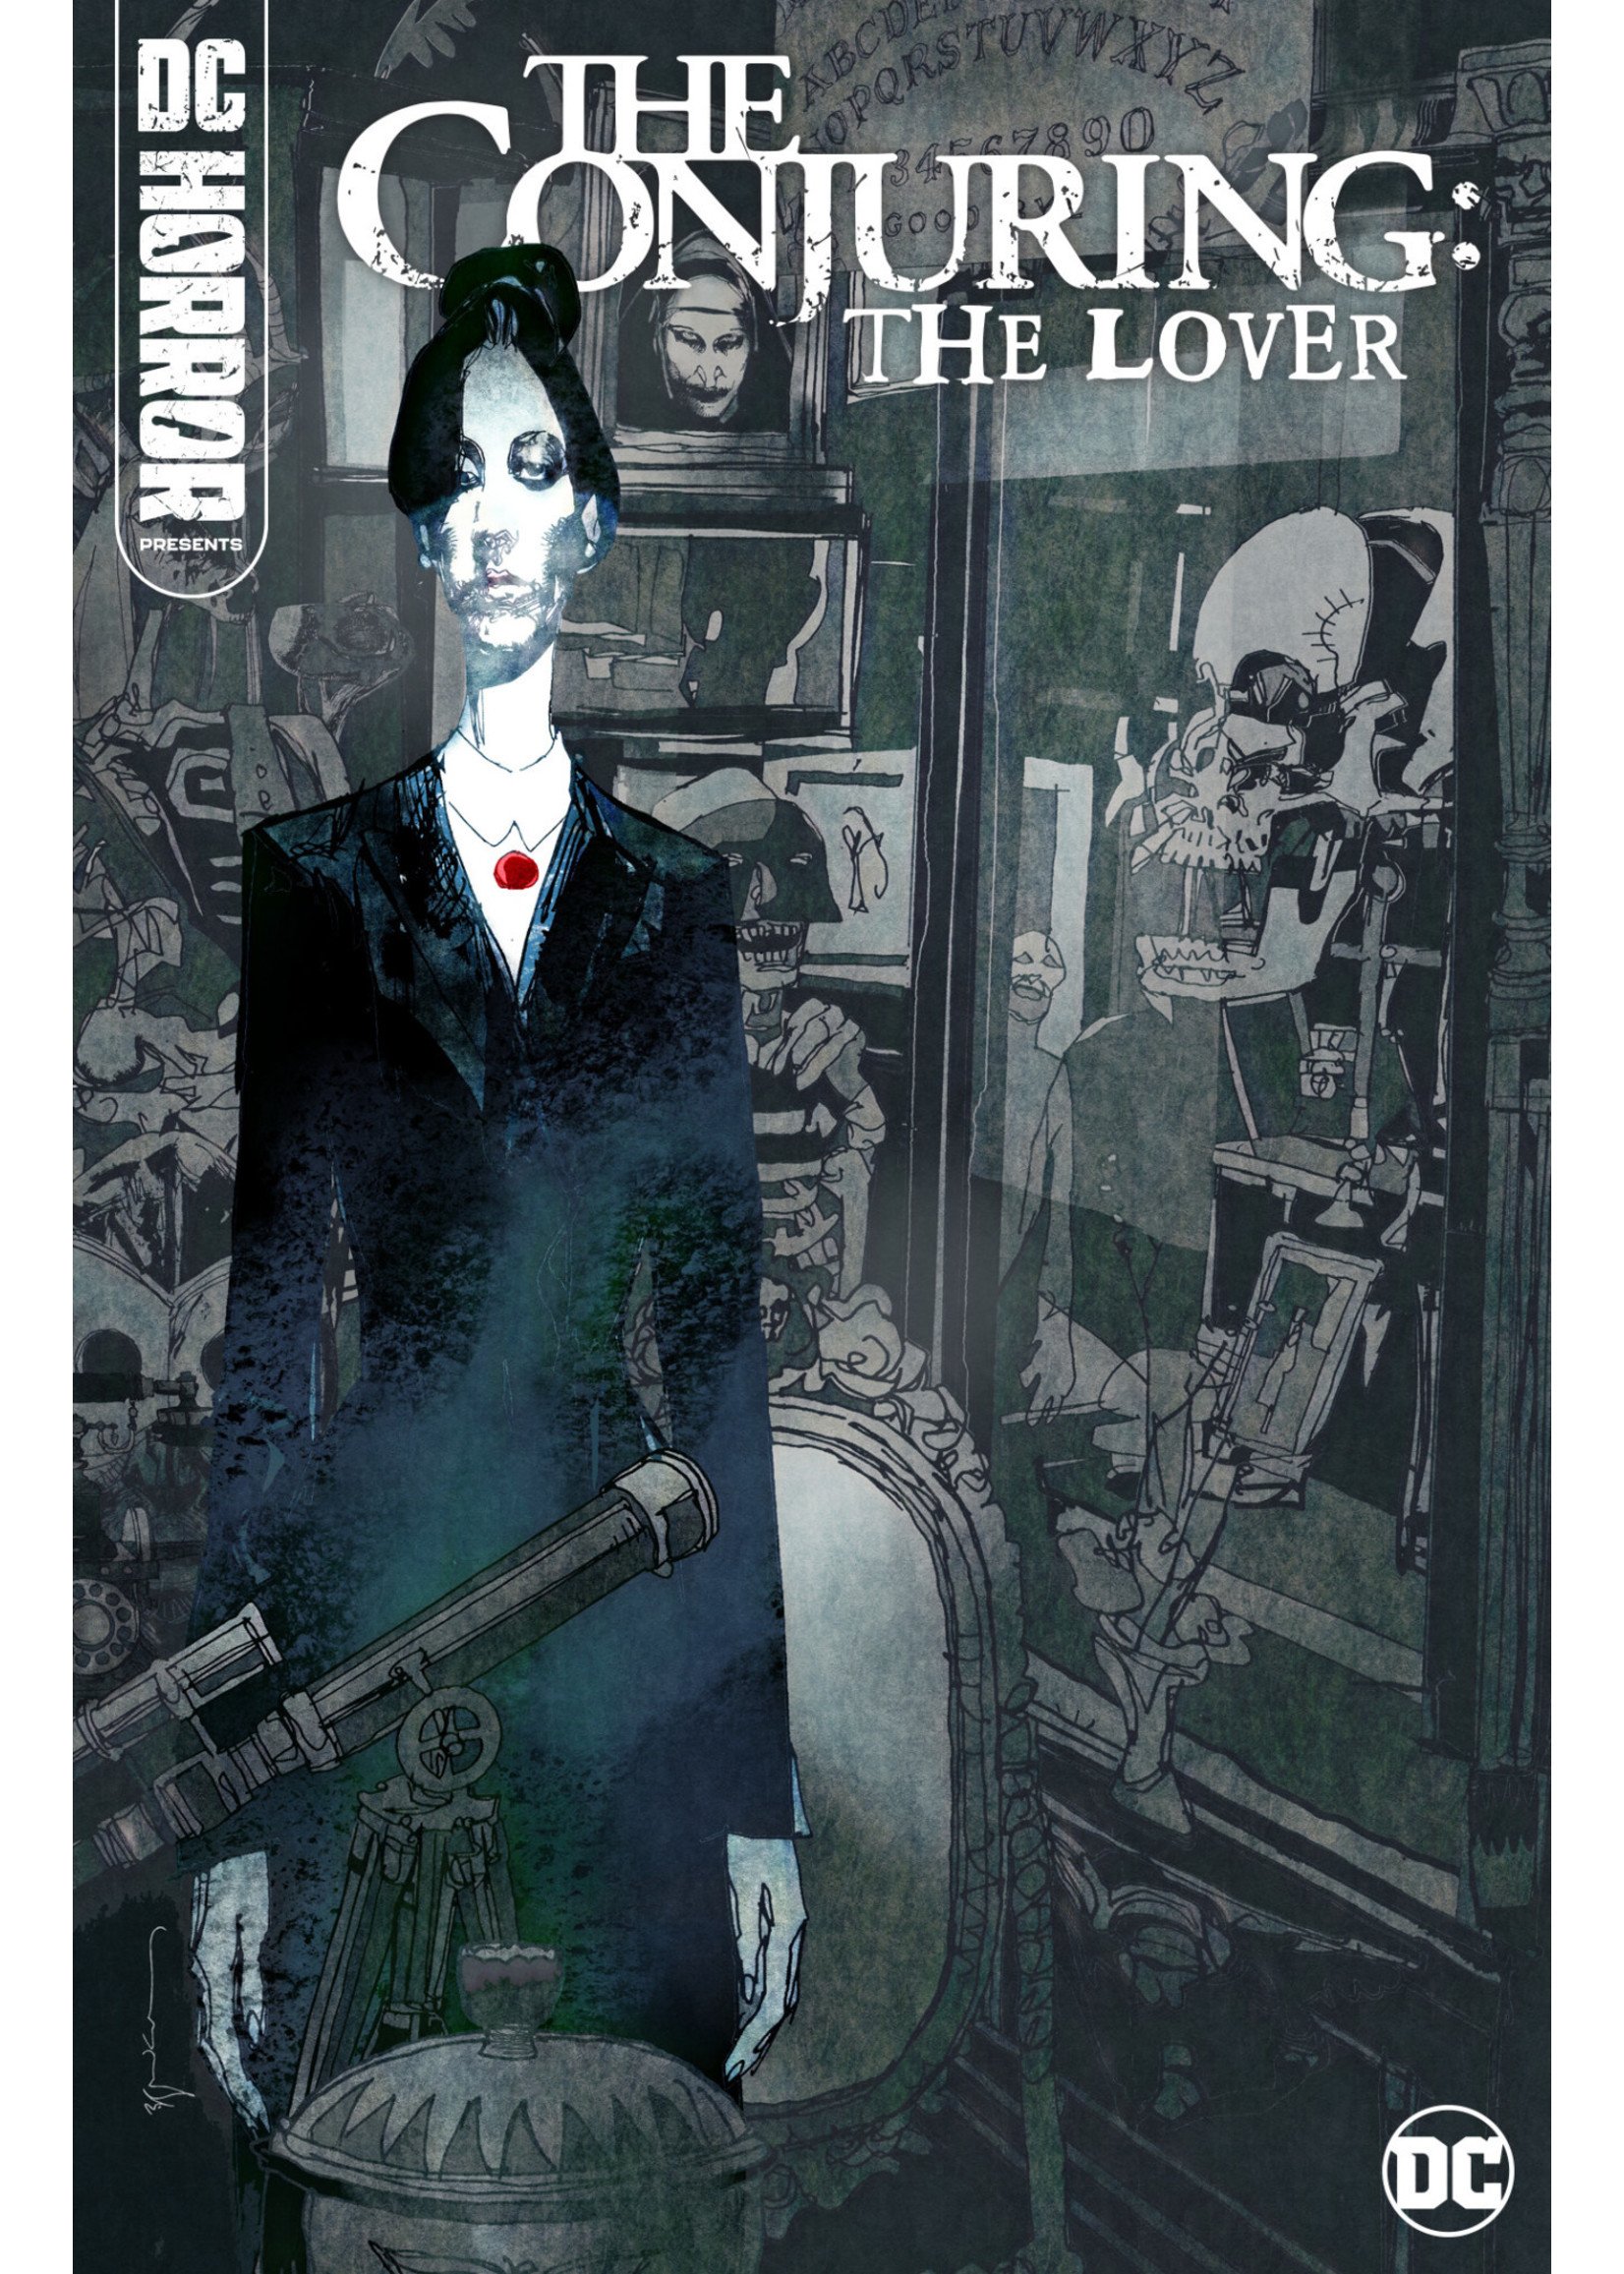 DC Horror Presents: The Conjuring - The Lover